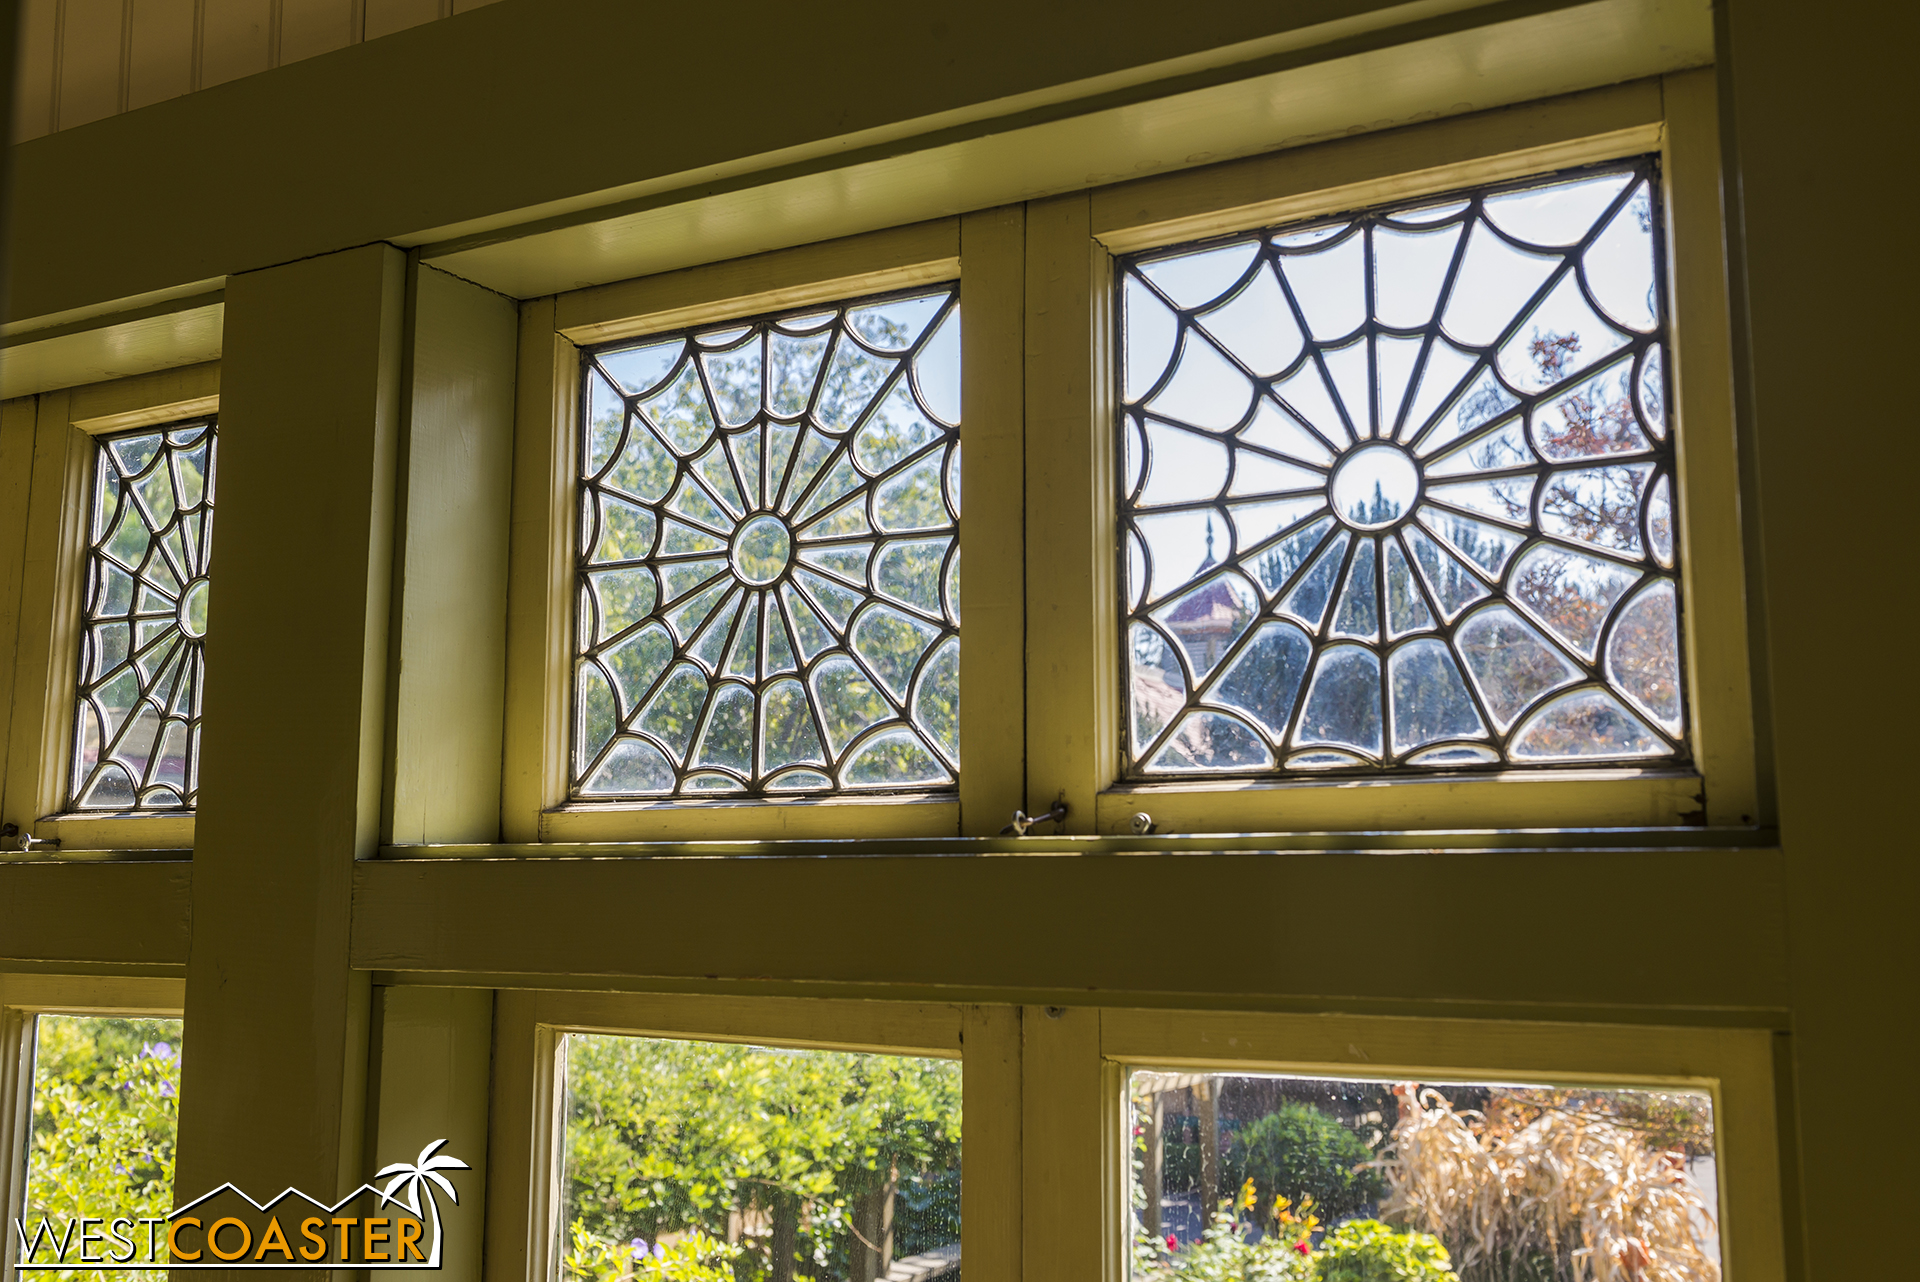  These spiderweb windows are rather fitting during the Halloween season! 